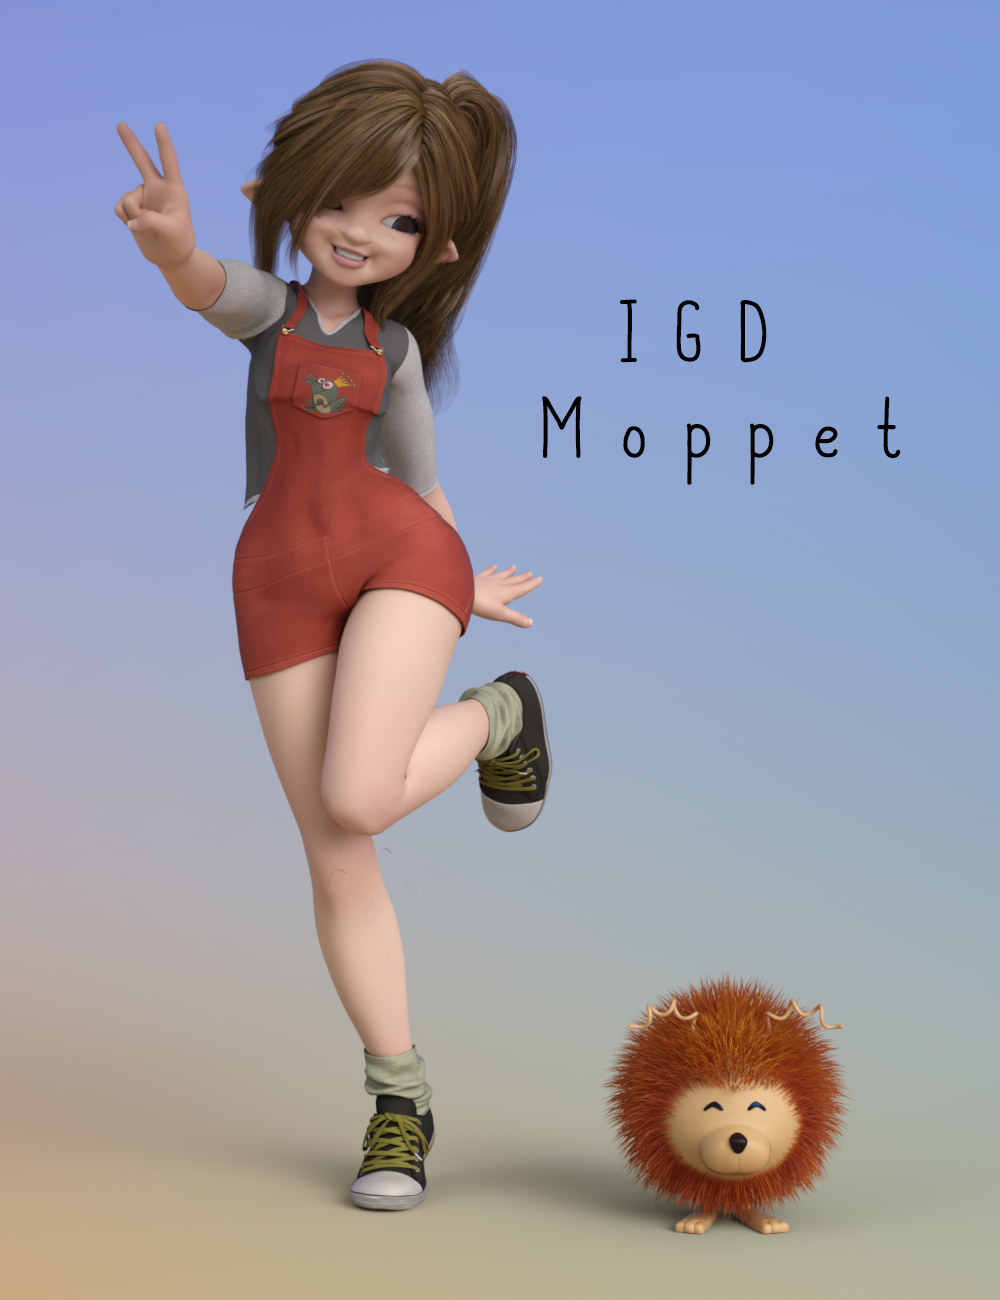 IGD Moppet Poses for Posey and Petunia | Daz 3D